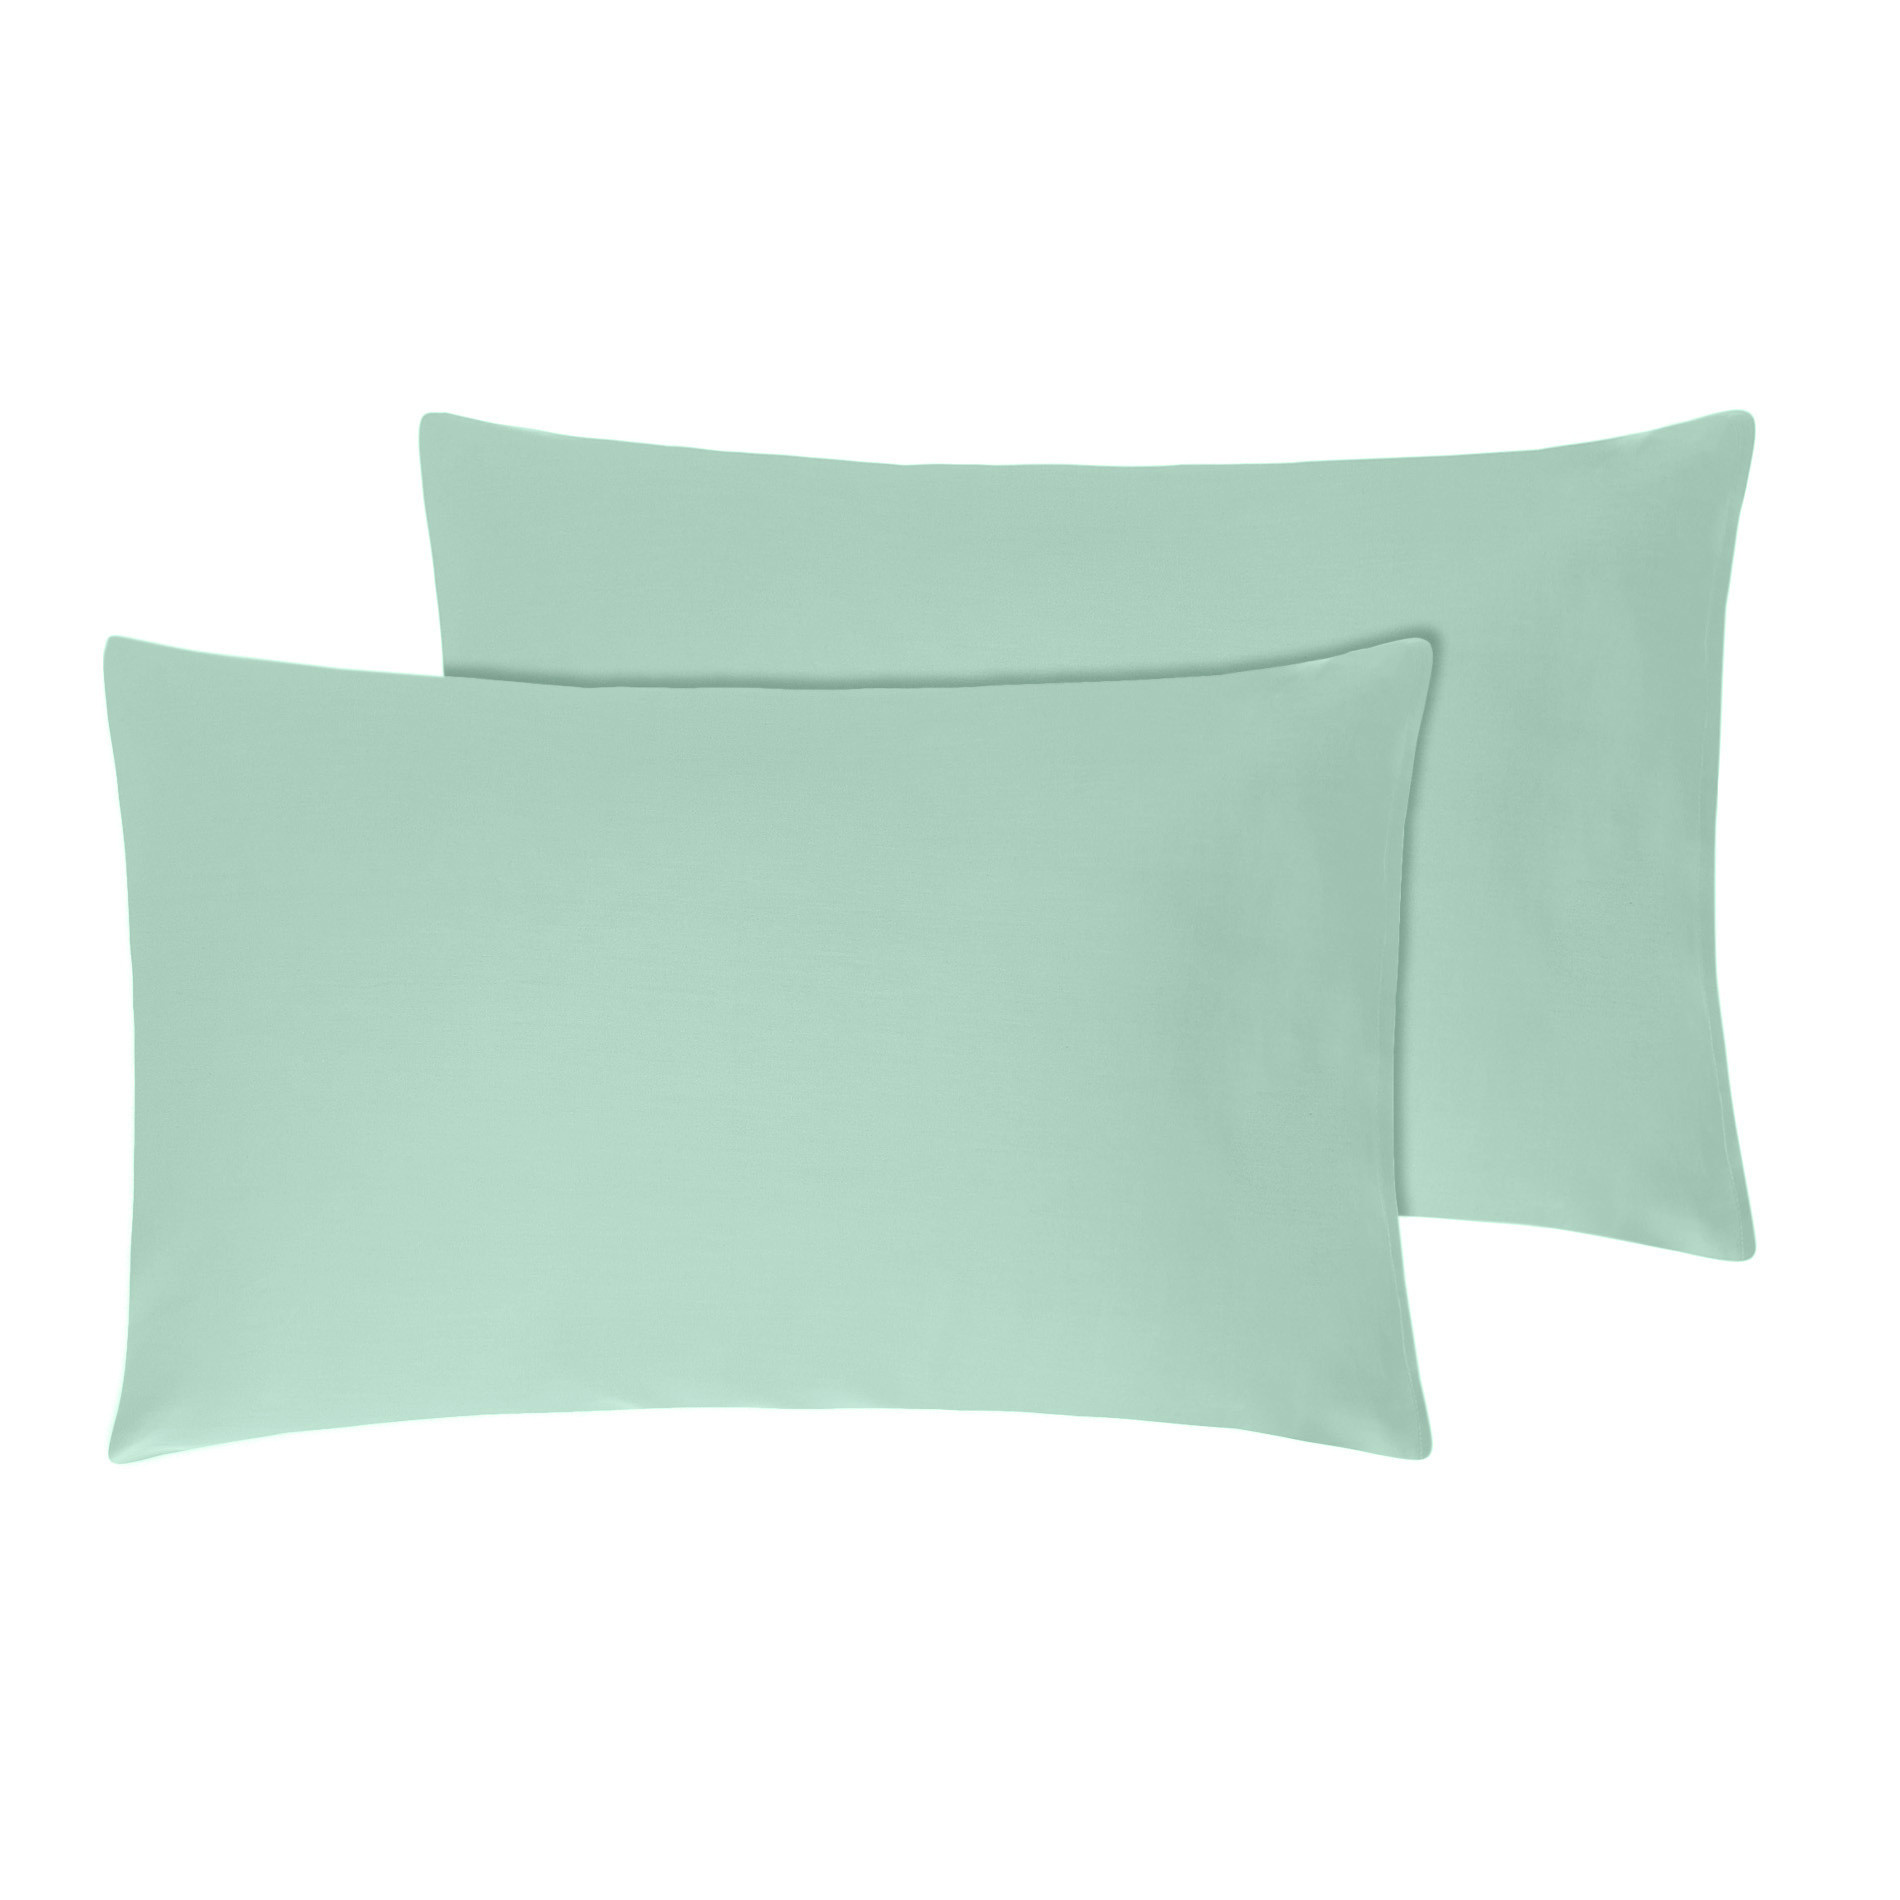 Zefiro 2-pack pillowcases in 100% cotton satin, Turquoise, large image number 0